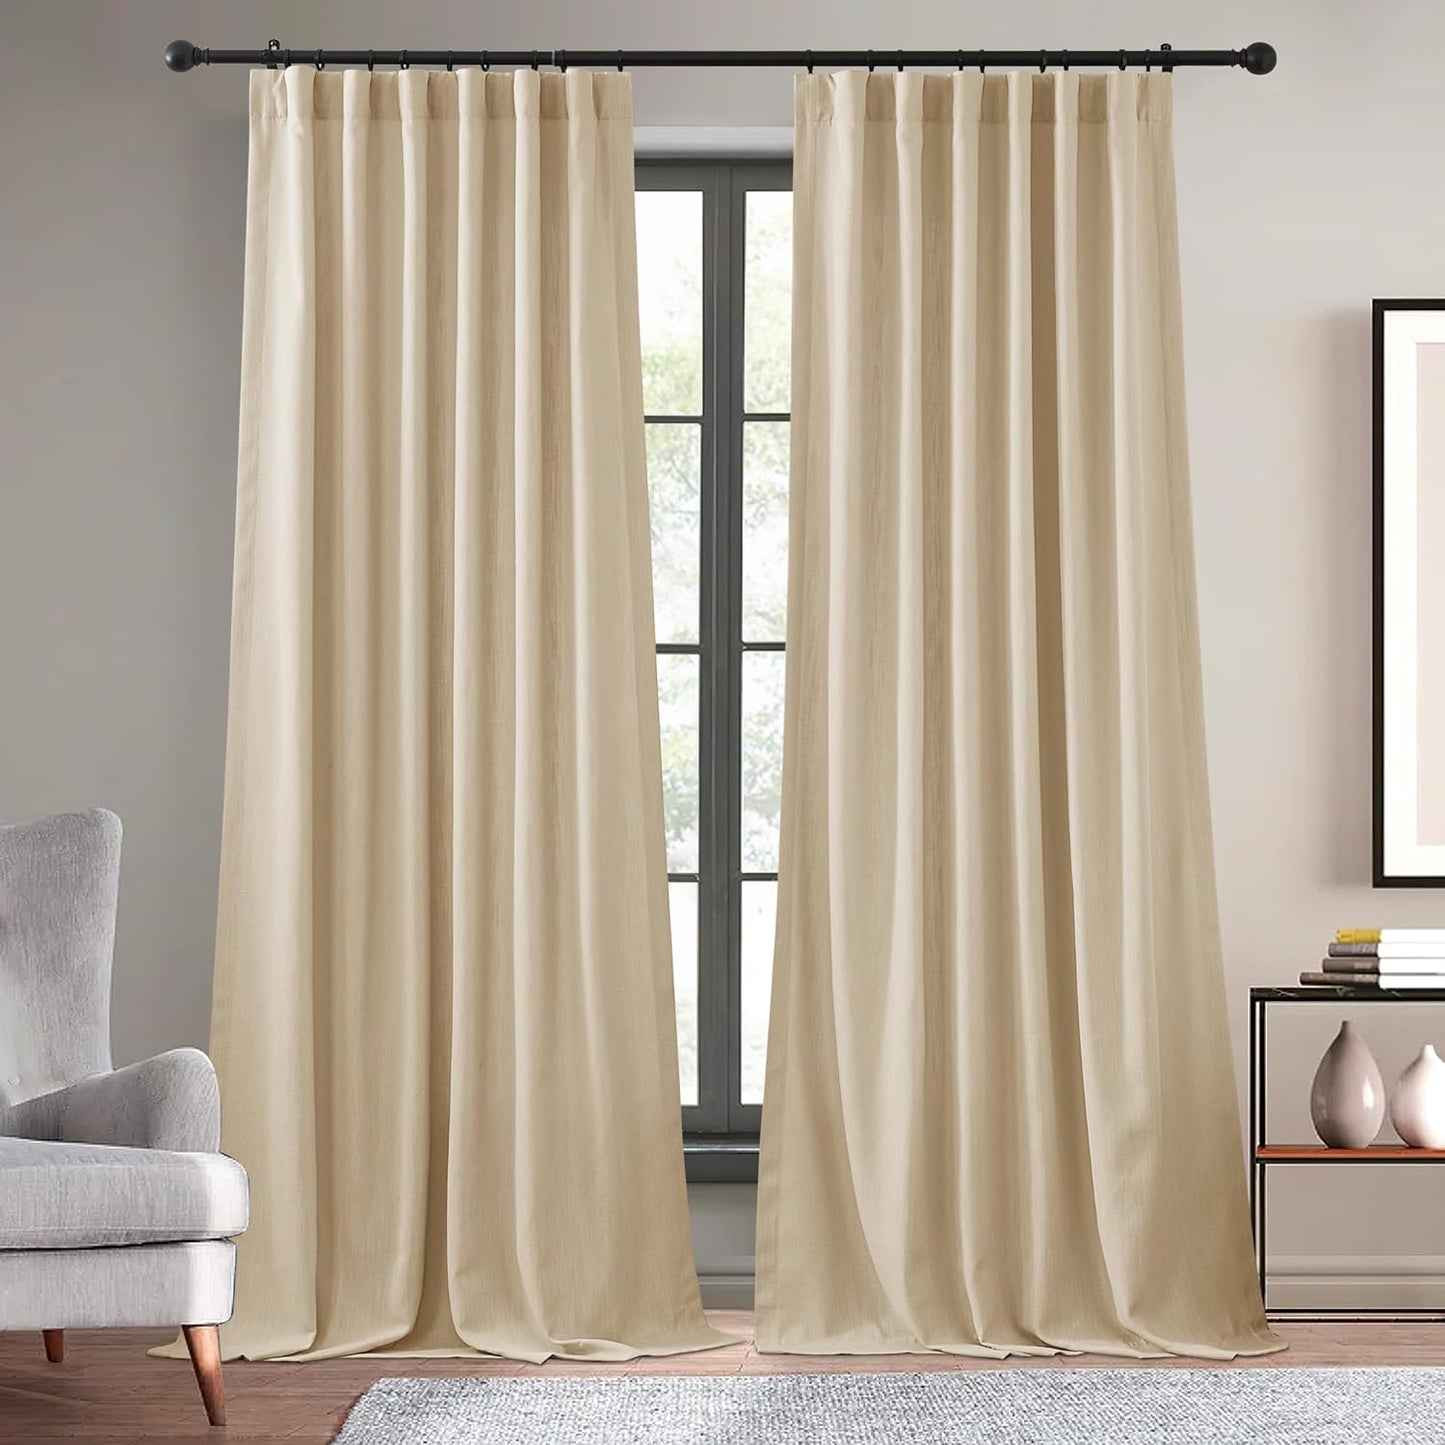 KGORGE Thick Faux Linen Weave Textured Curtains for Bedroom Light Filtering Semi Sheer Curtains Farmhouse Decor Pinch Pleated Window Drapes for Living Room, Linen, W 52" X L 96", 2 Pcs  KGORGE Thatched Tan W 52 X L 120 | Pair 